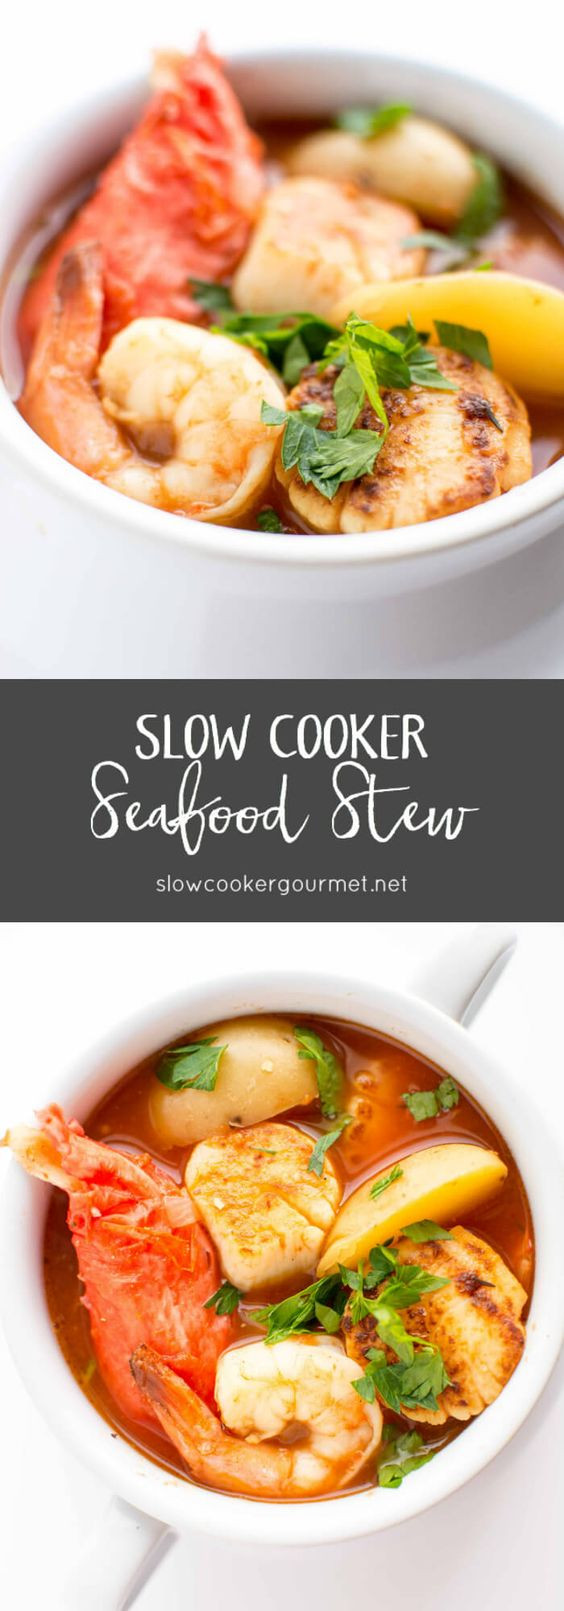 Seafood Stew Slow Cooker
 Stew Crockpot and Seafood on Pinterest